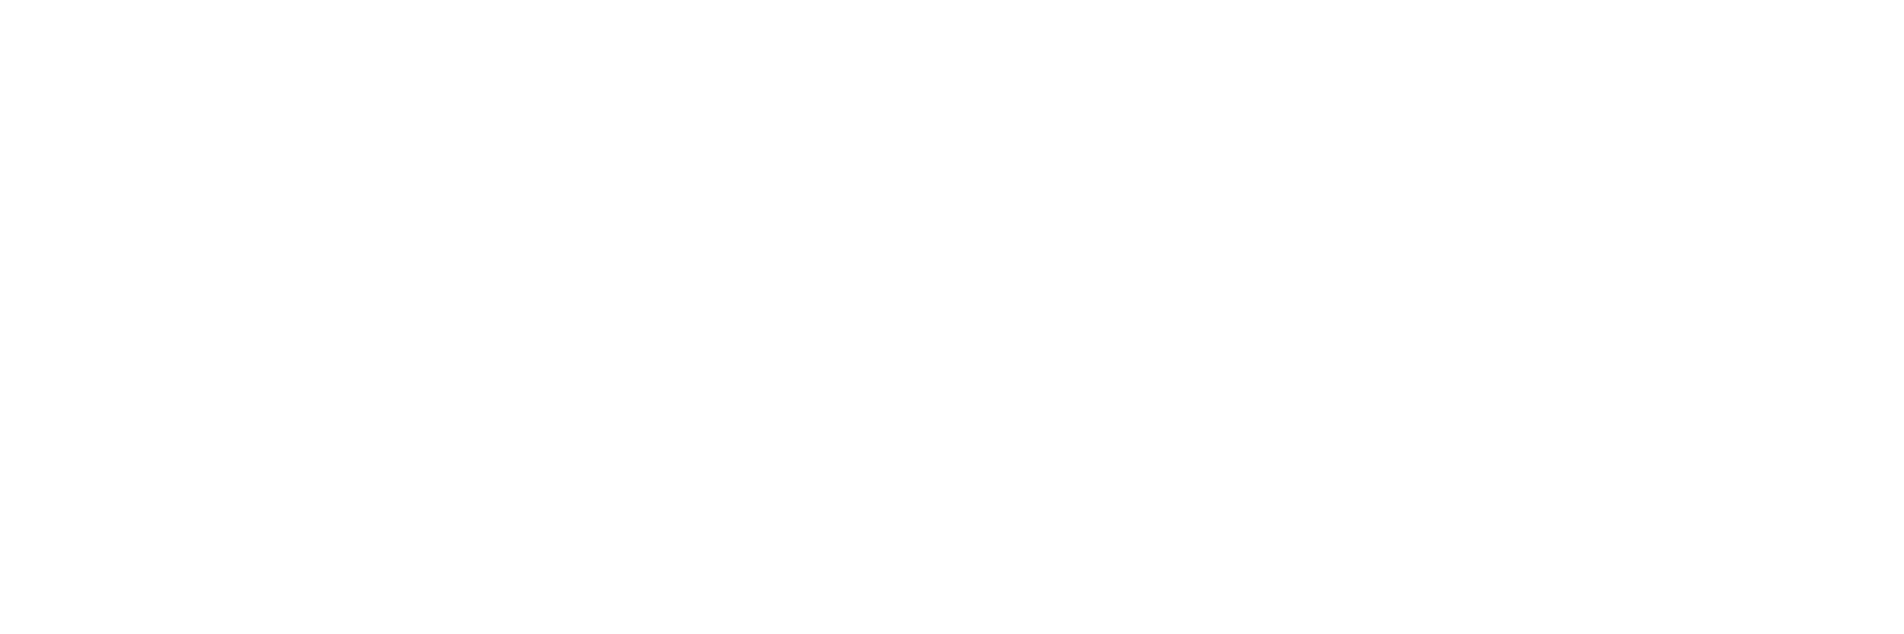 Lenzing for protective wear icon image